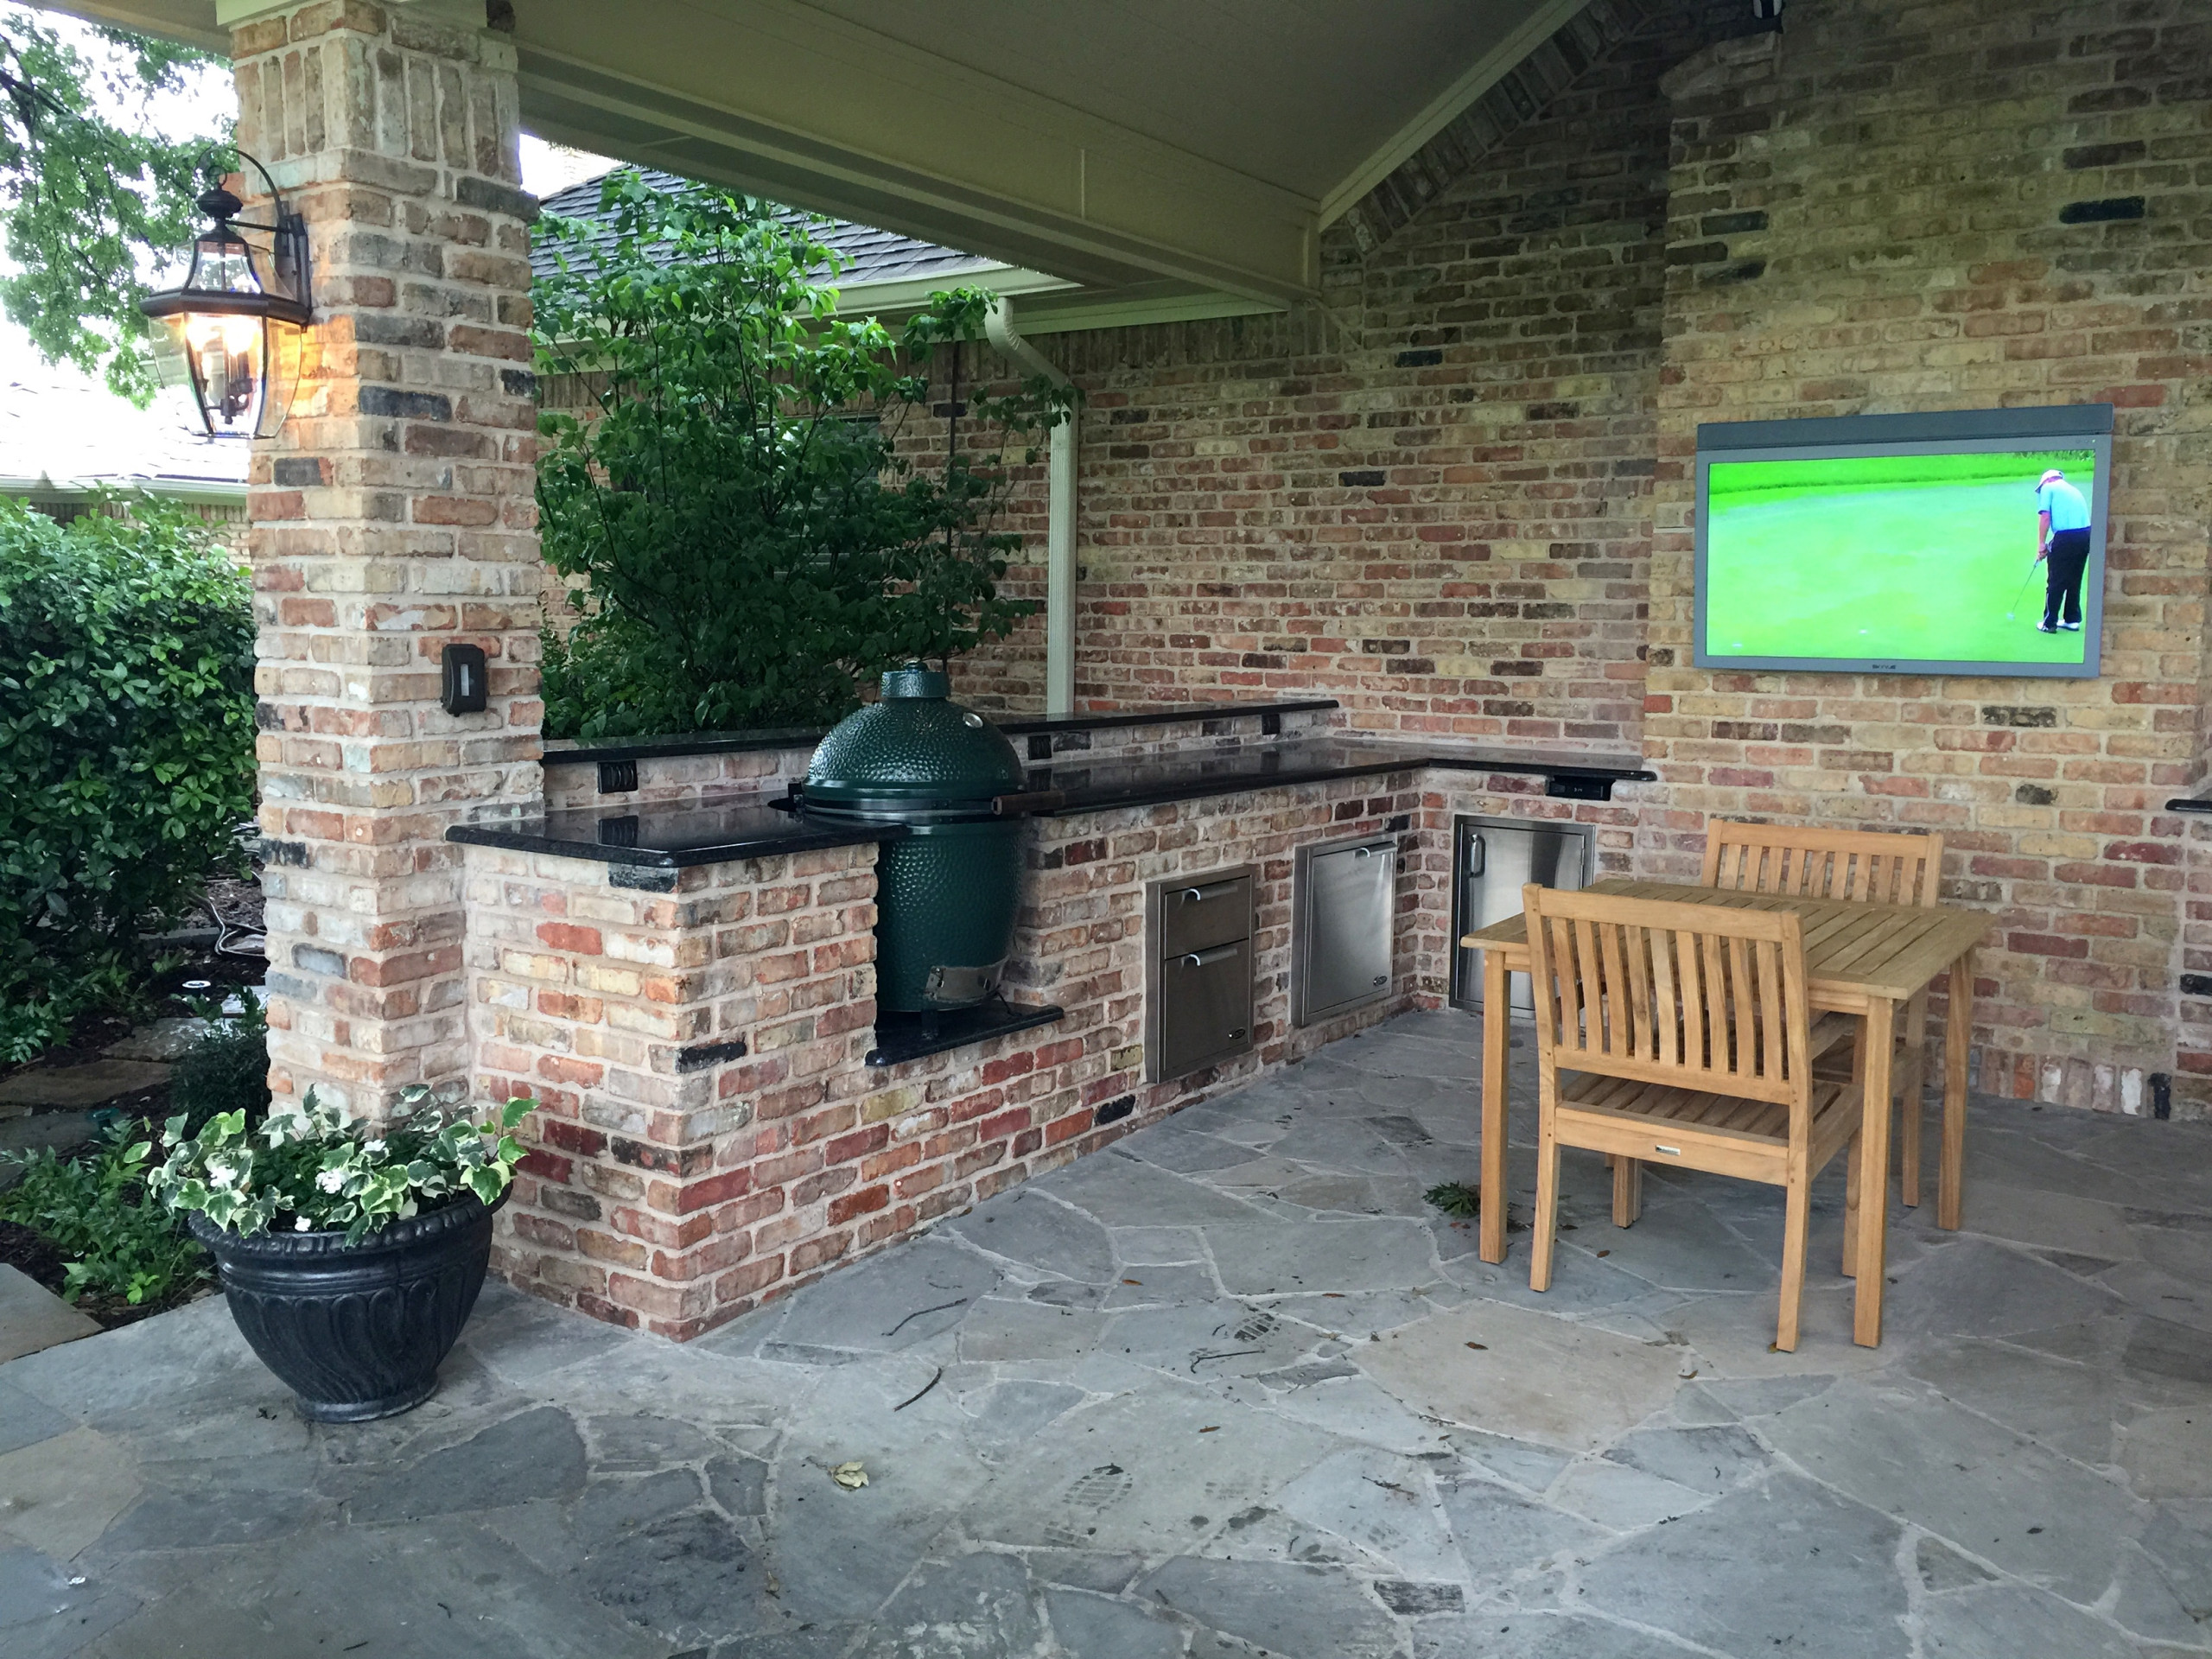 Garden for Her / Outdoor Man Cave for him